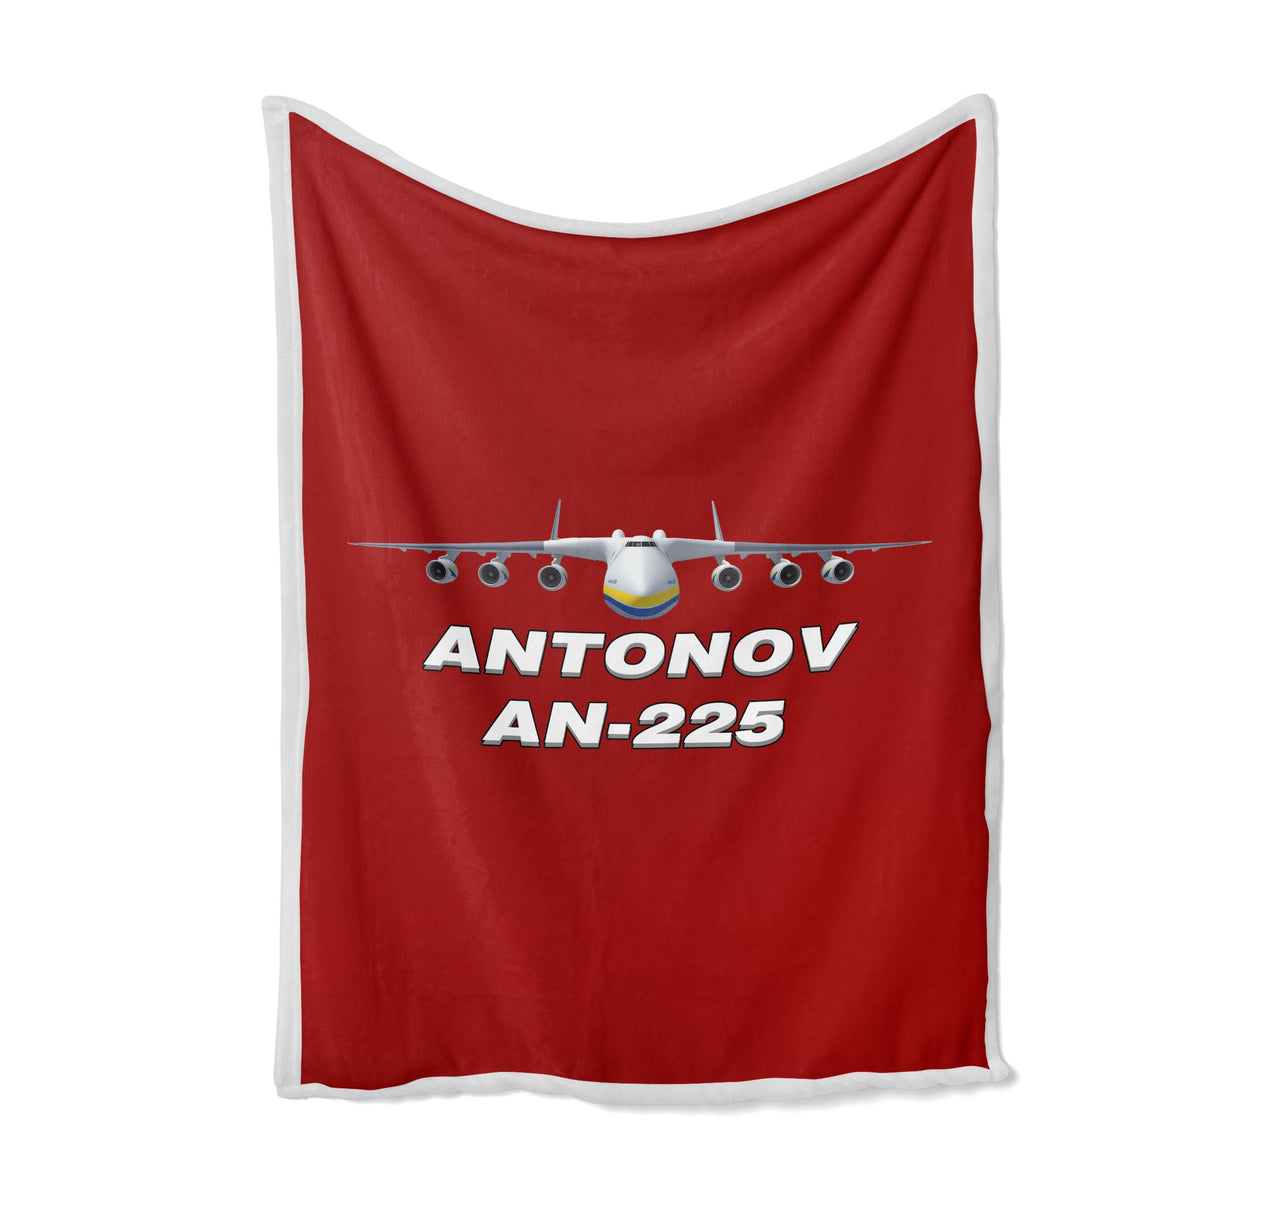 Antonov AN-225 (16) Designed Bed Blankets & Covers